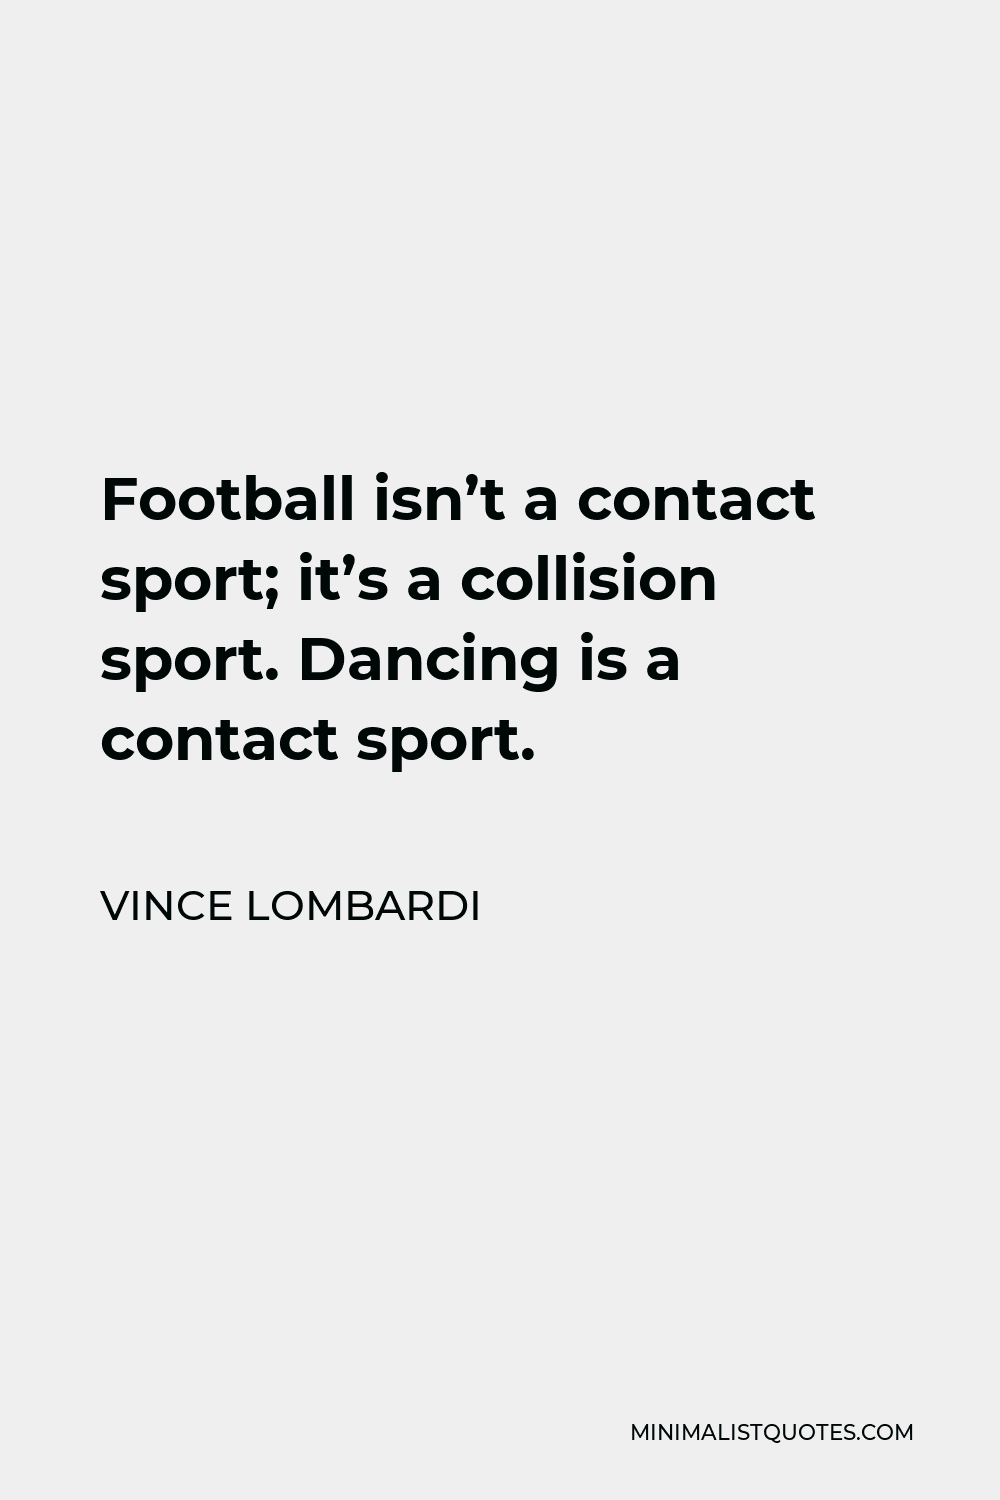 Vince Lombardi Quote - Football isn’t a contact sport; it’s a collision sport. Dancing is a contact sport.